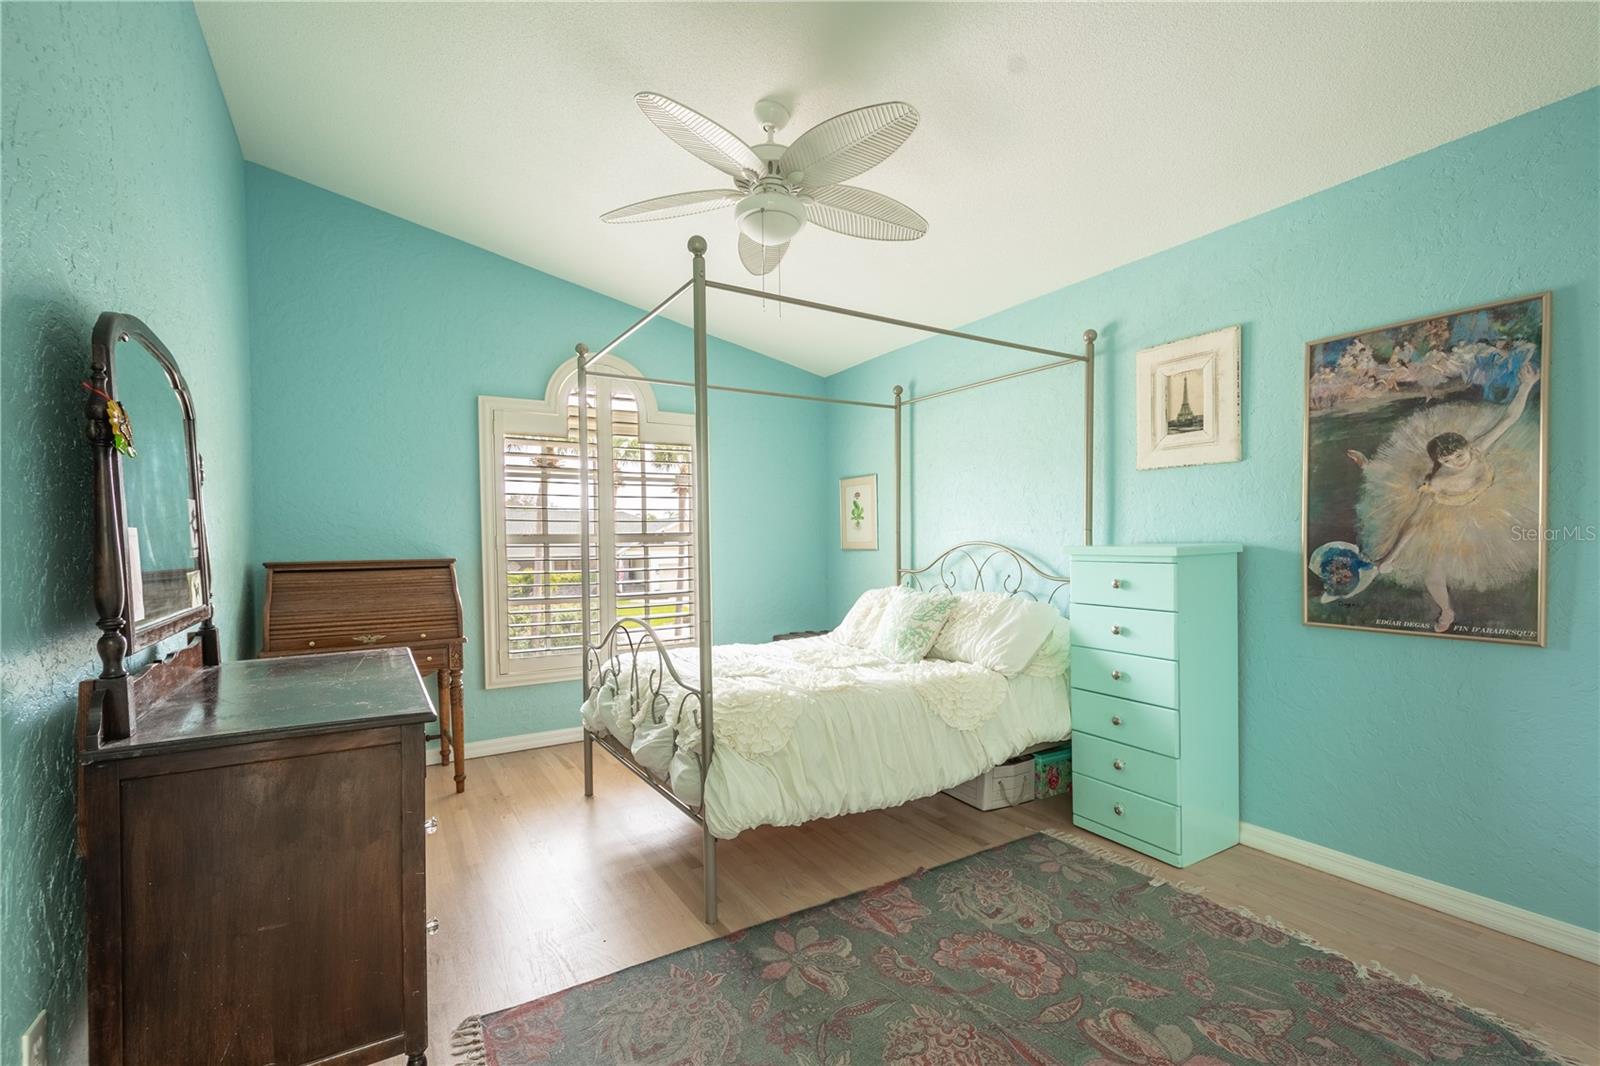 Bedroom 3 features high ceilings with ceiling fan, a built in closet, wood floor and plantation shutters.